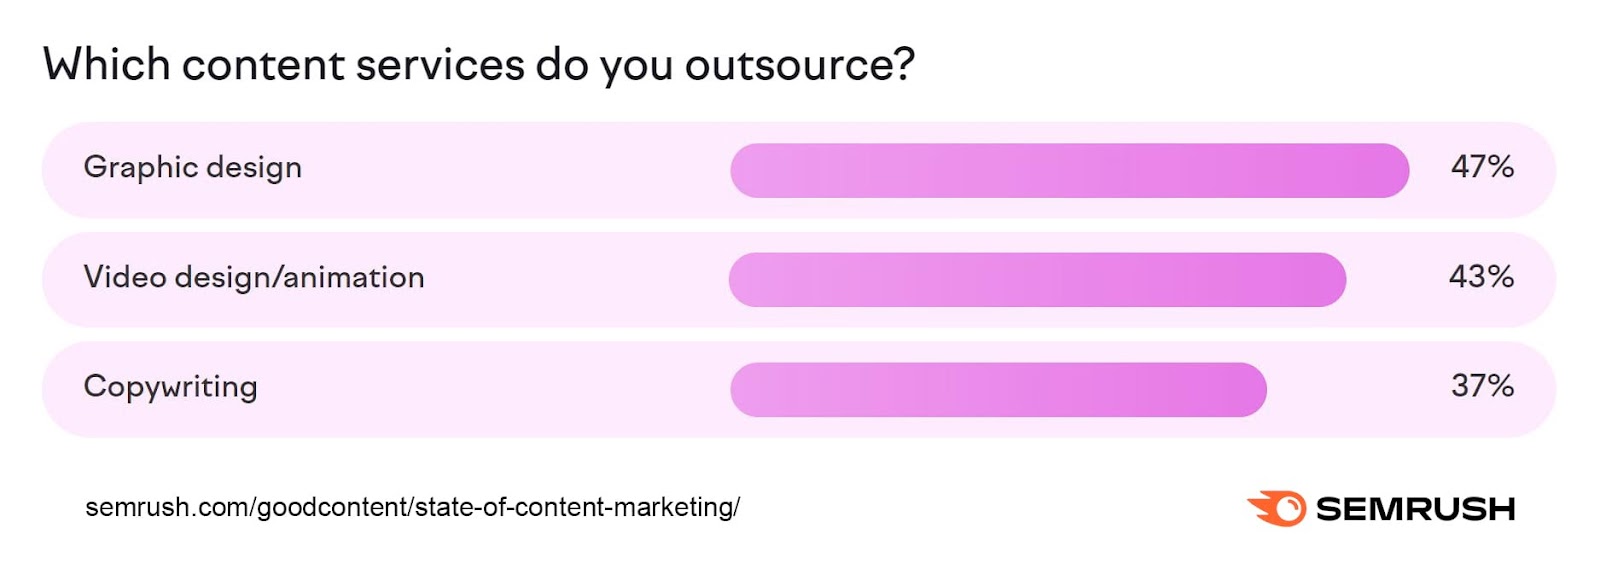 Answers to "Which content services do you outsource?" from State of Content Marketing report